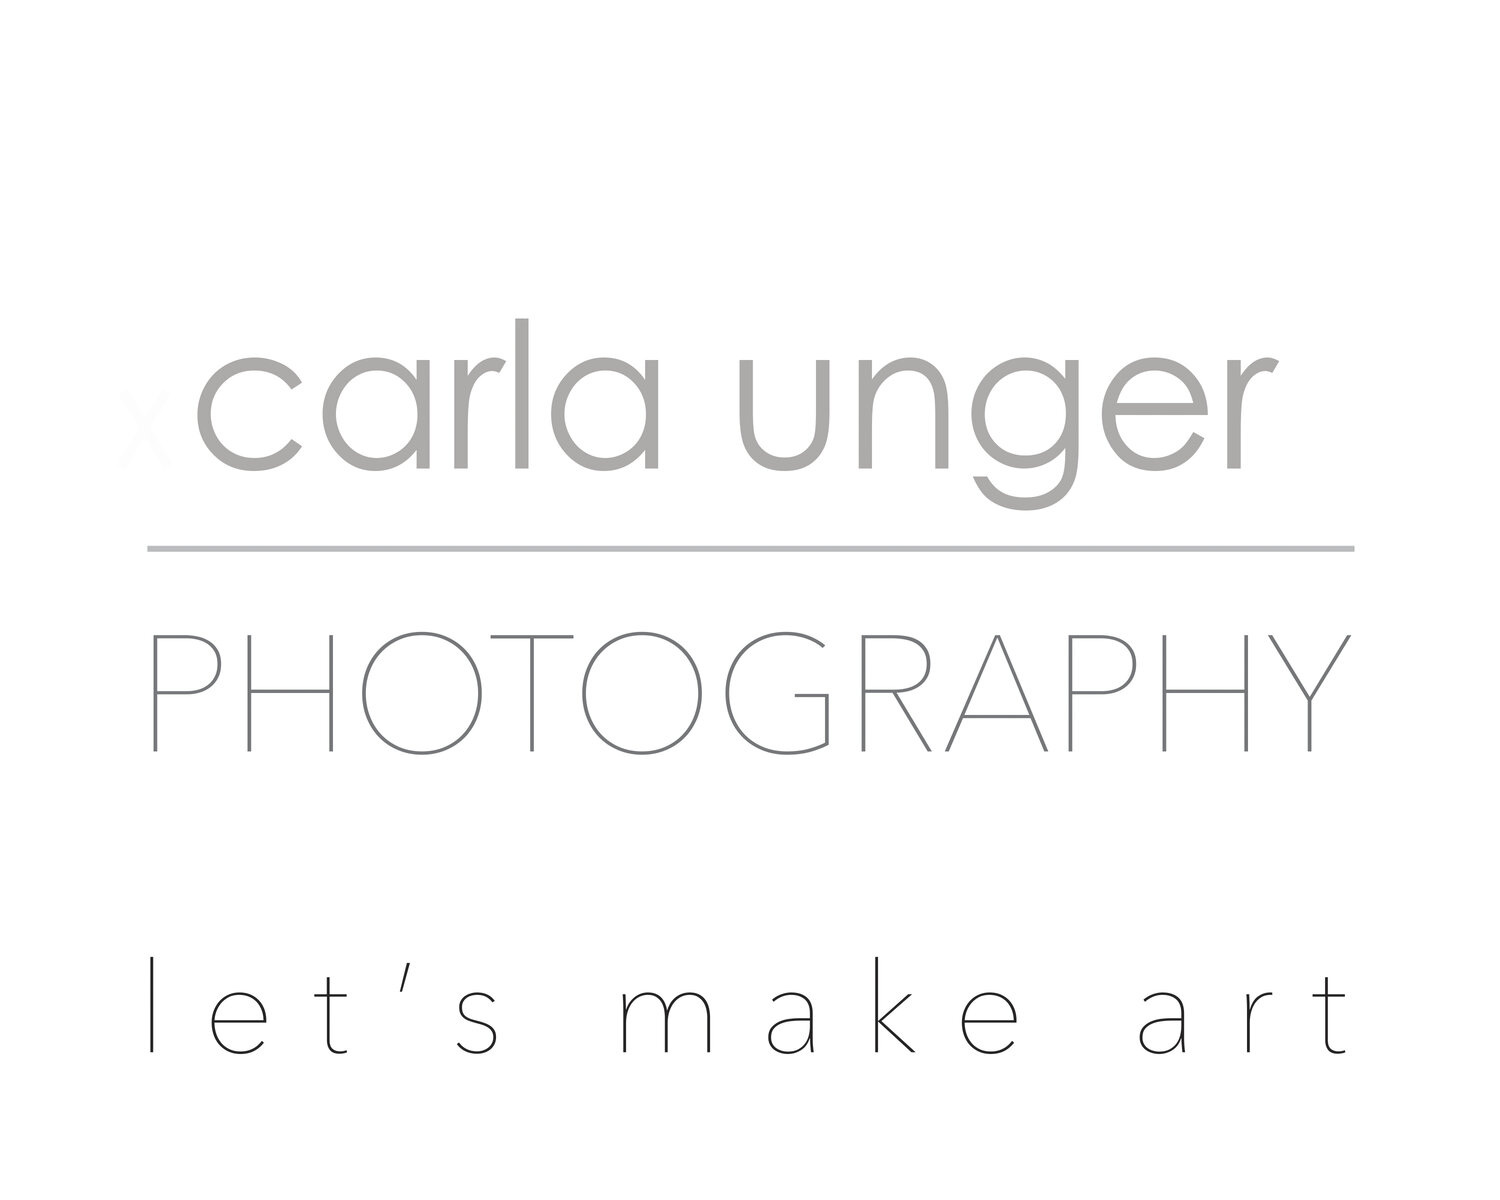 Carla Unger Photography